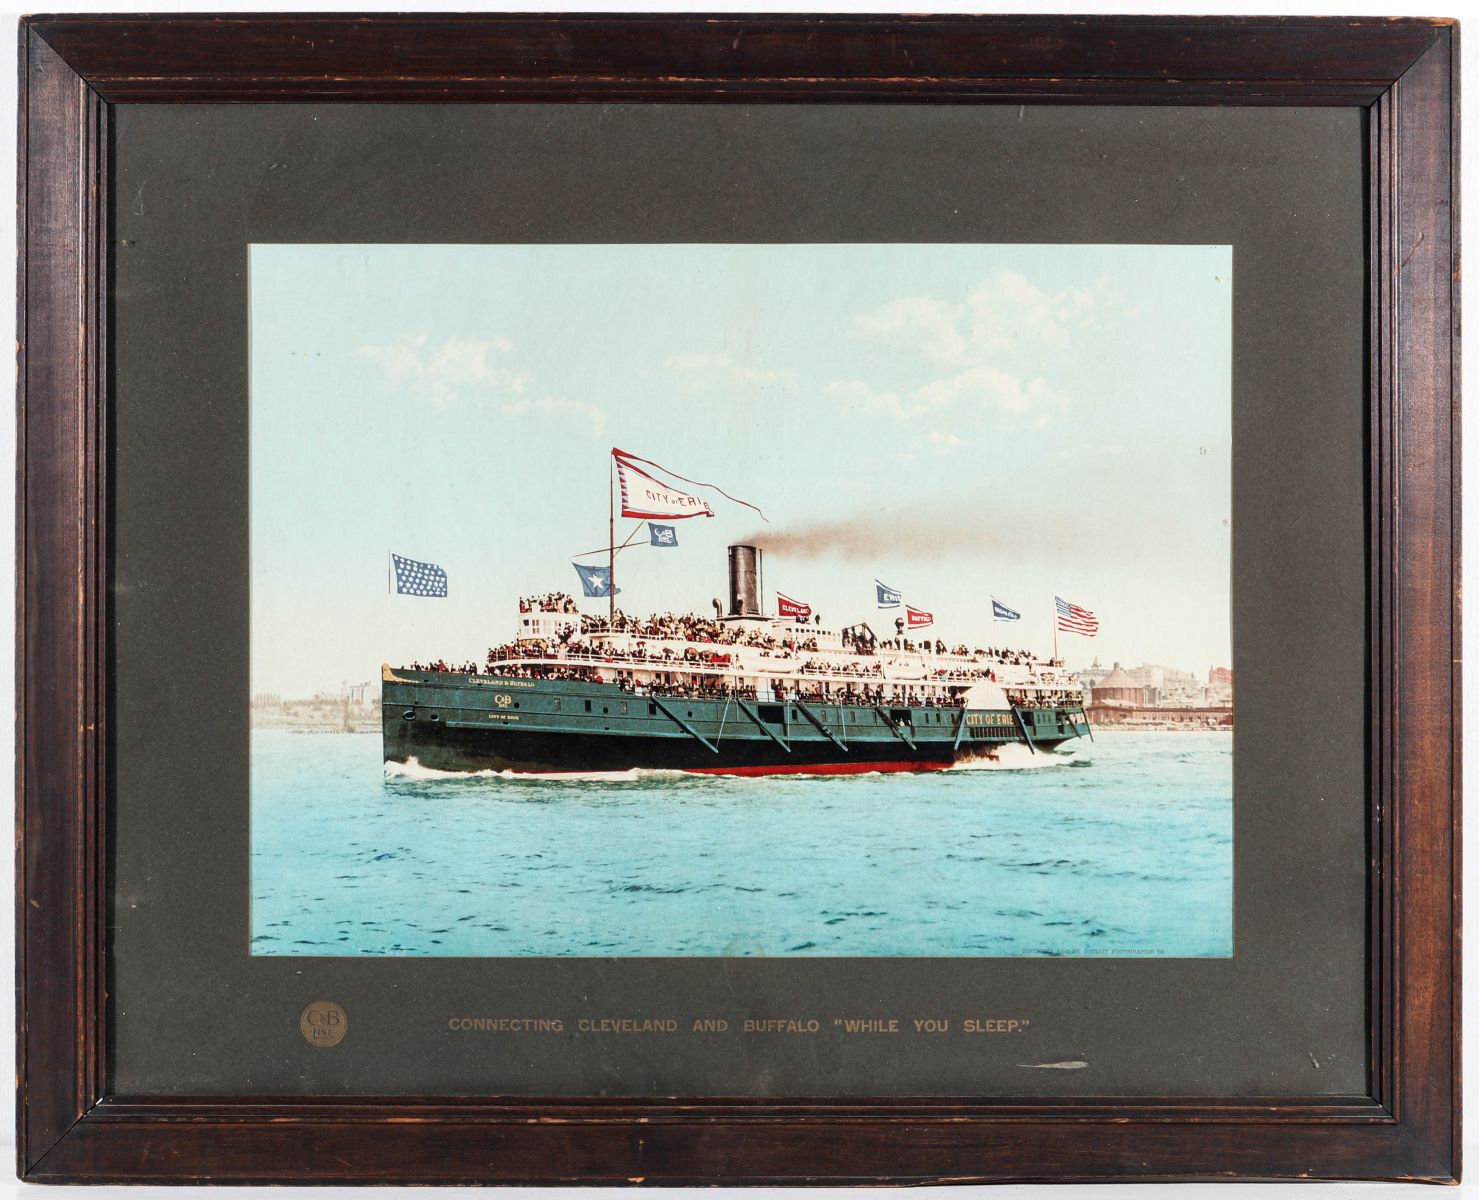 THE CITY OF ERIE STEAMSHIP OF CLEVELAND & BUFFALO LINE